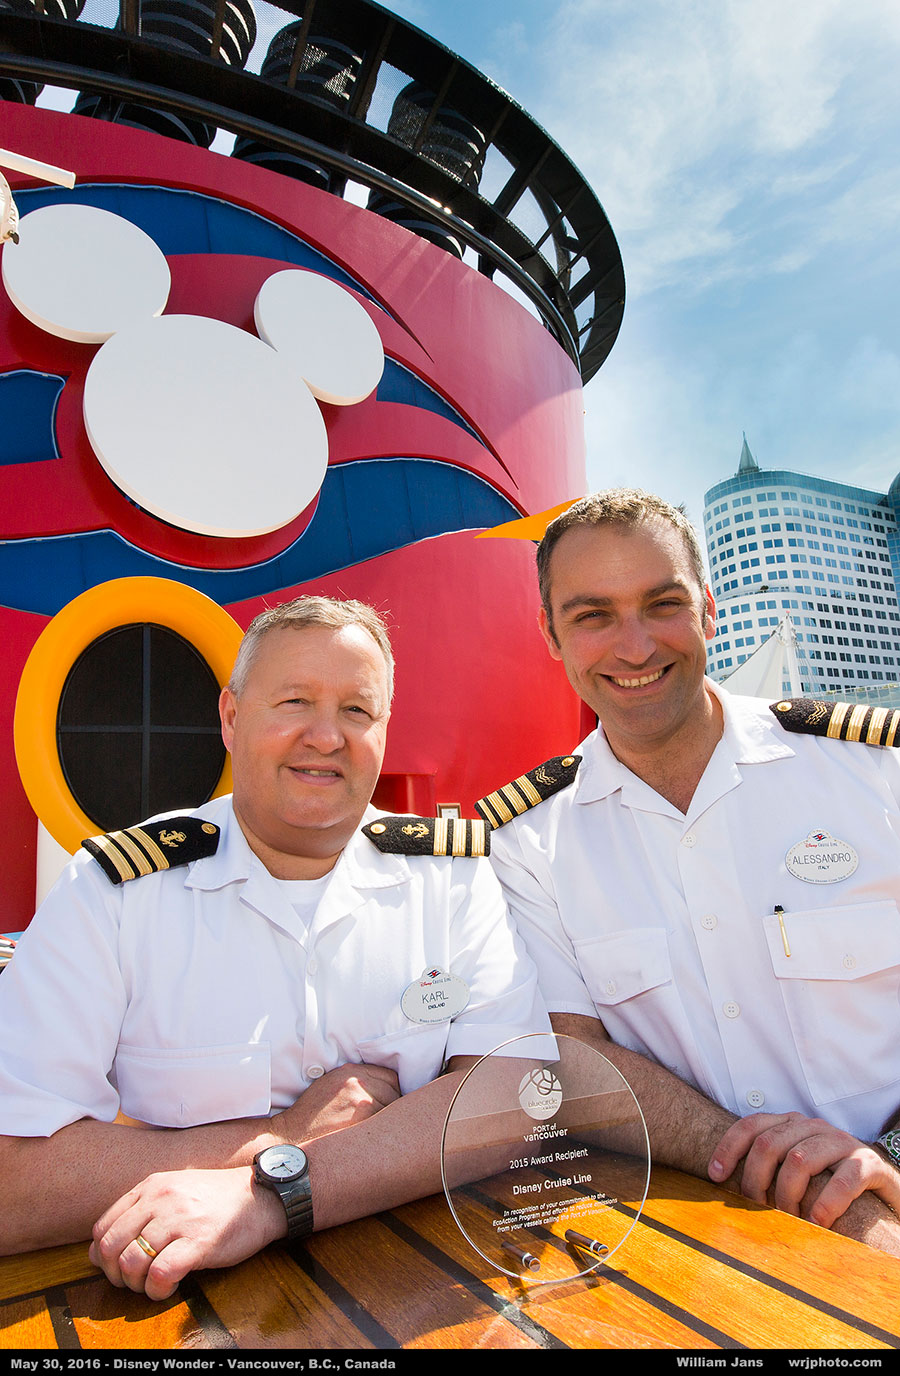 Chief Electrical Engineer Alessandro and Environmental Officer Karl receive the Port of Vancouver’s 2015 Blue Circle Award on behalf of Disney Cruise Line.